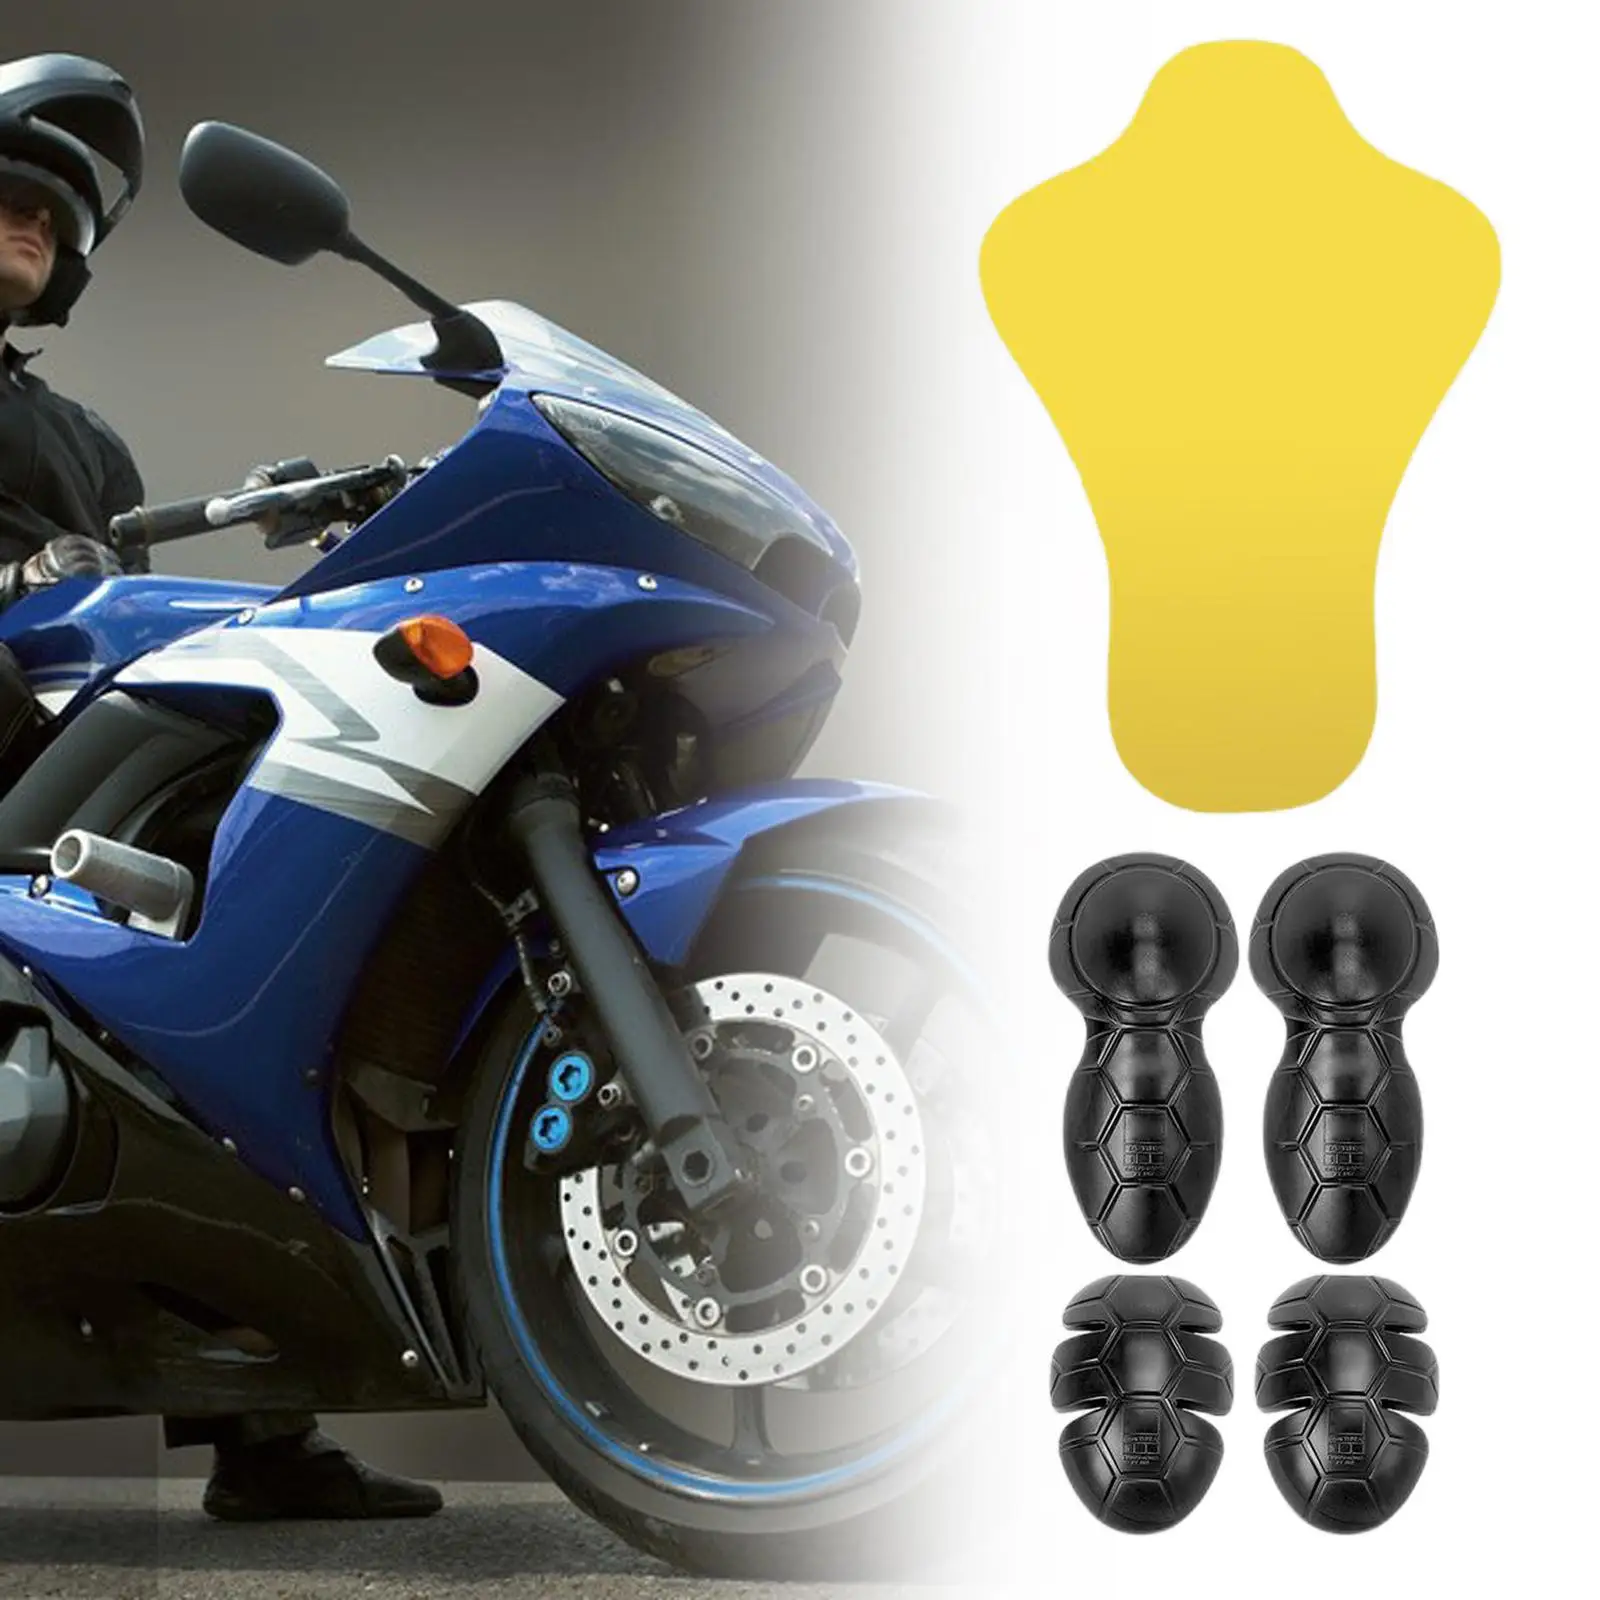 5Pcs Motorcycle Armor Armor Pad Armour Insert Protector Set Pads Guards Jacket Shoulder Elbow Back Chest Protector Pads Pads Set